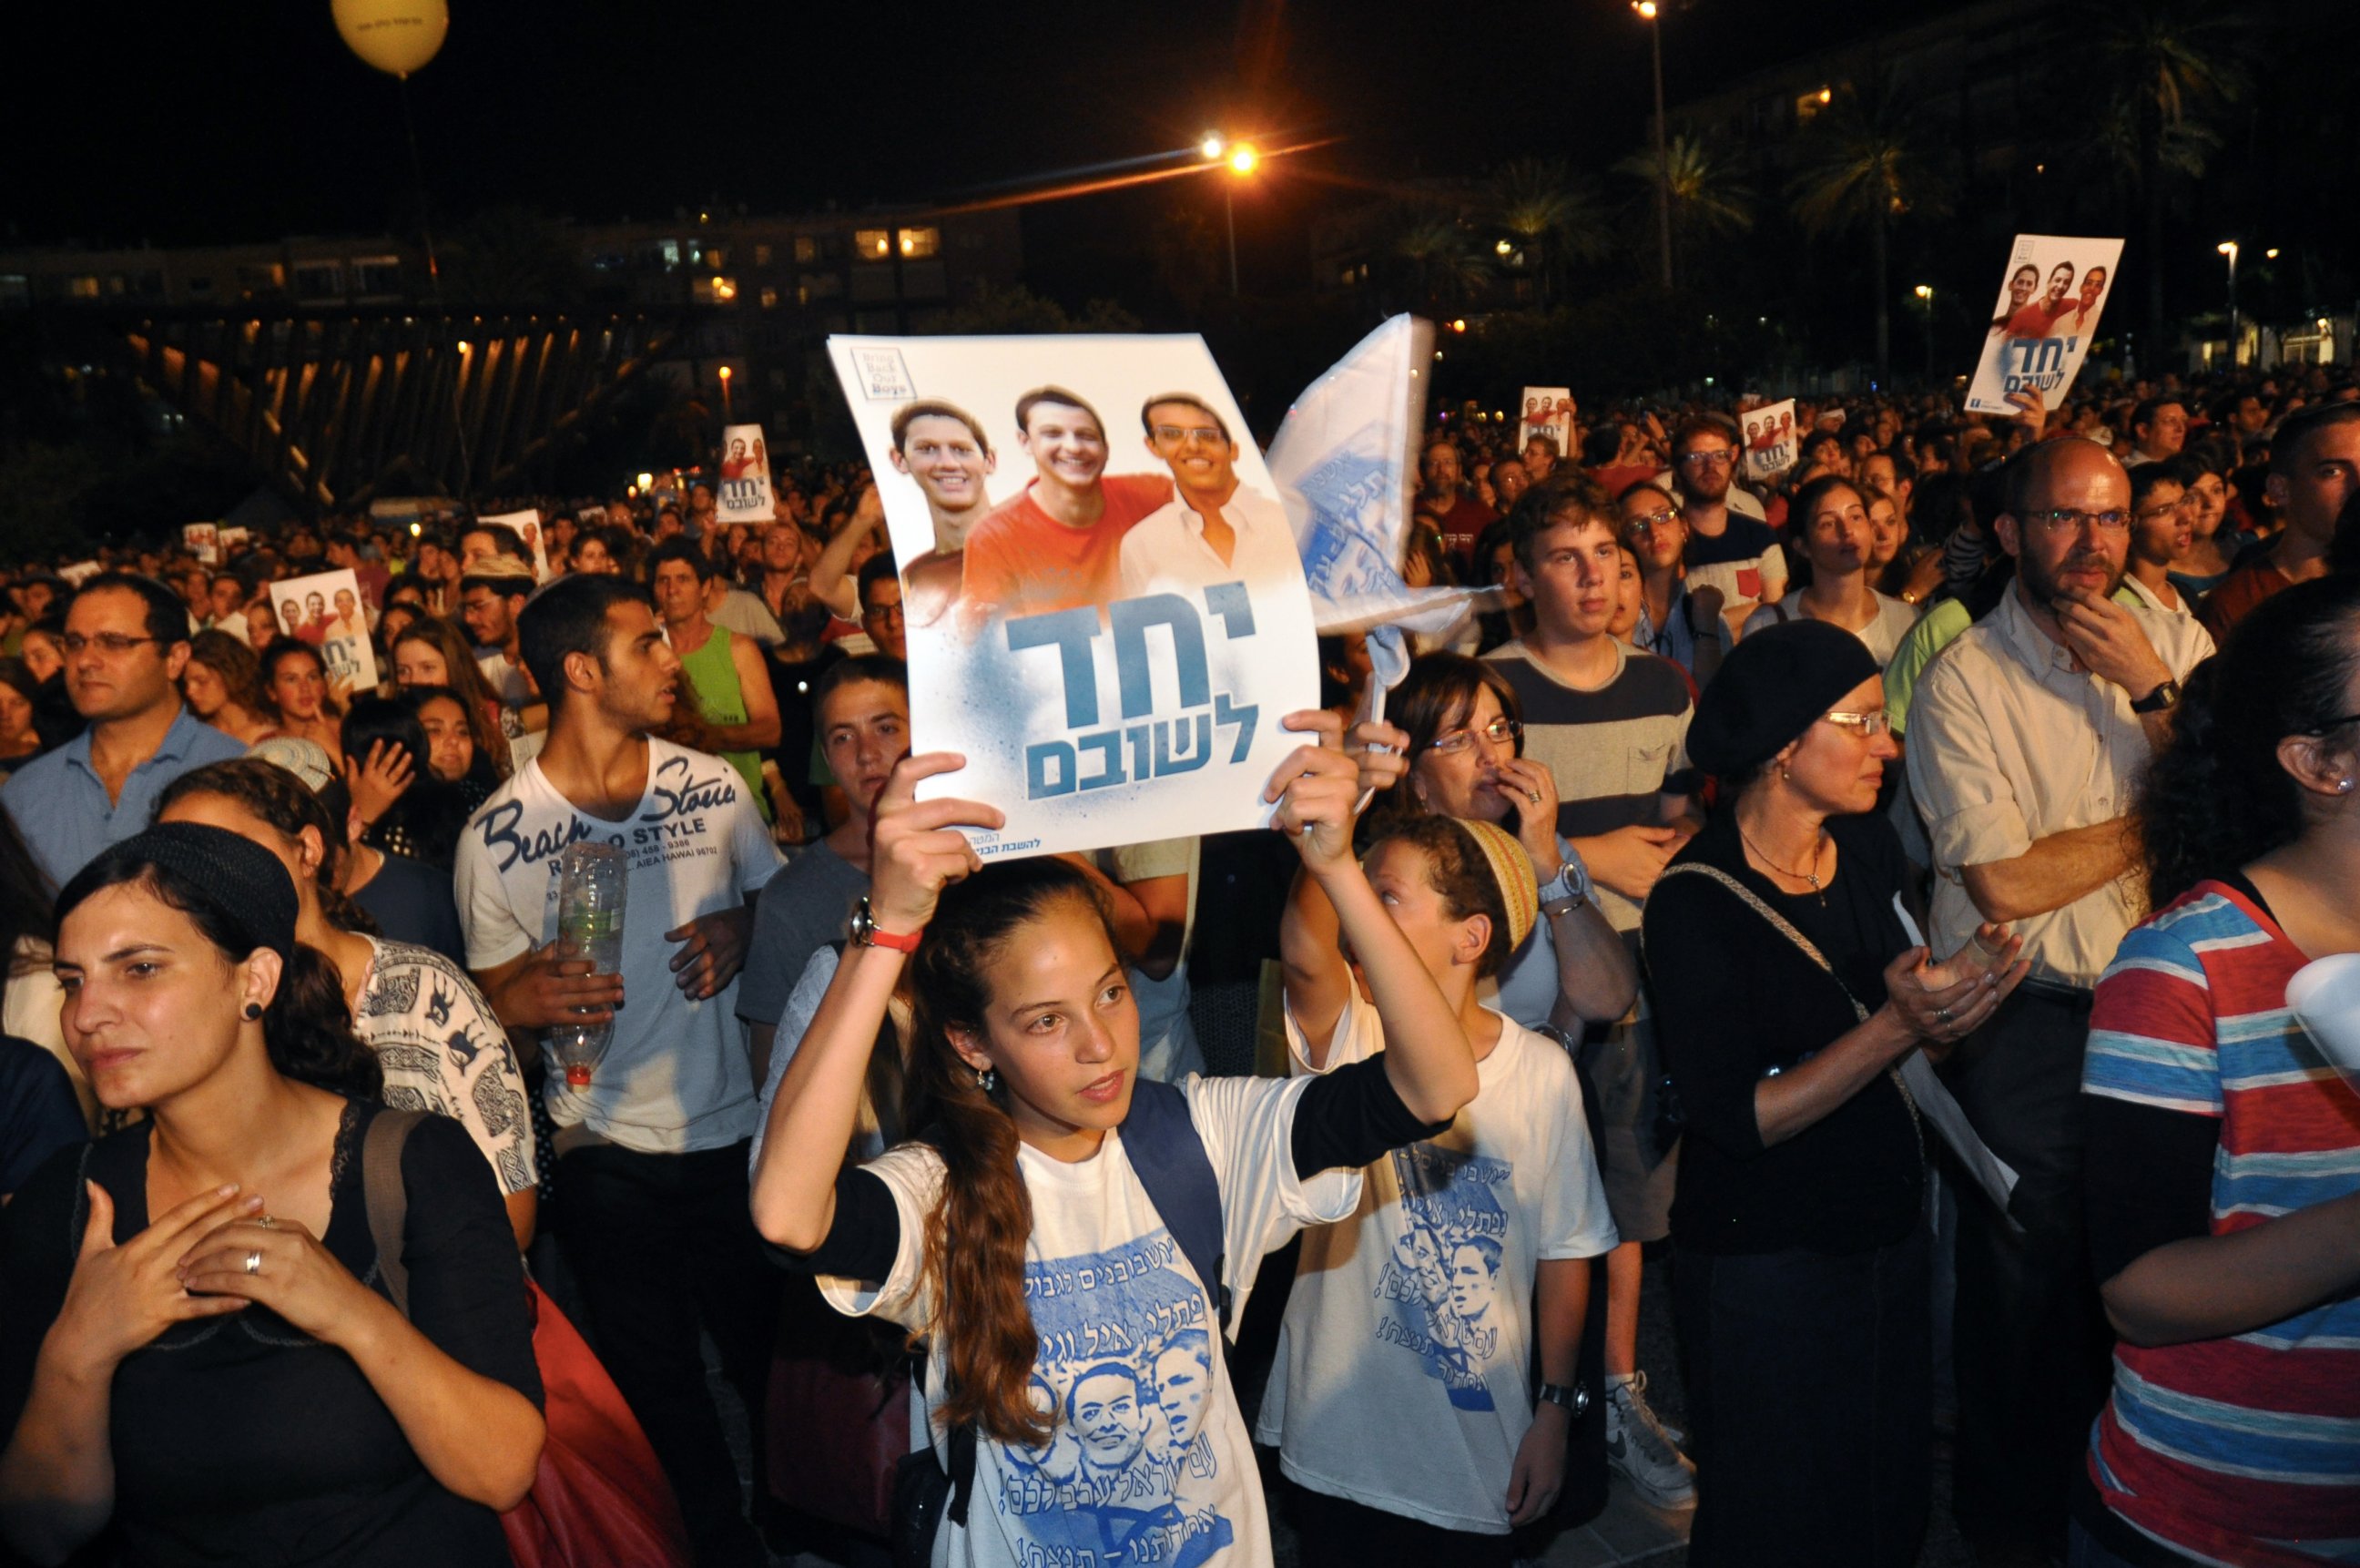 PHOTO: Thousands of people gathered in Tel Aviv's Rabin Square on June 29, 2014 for a rally calling for the release of the three Israeli boys who  were kidnapped on June 19 near the West Bank settlement of Gush Etzion. 